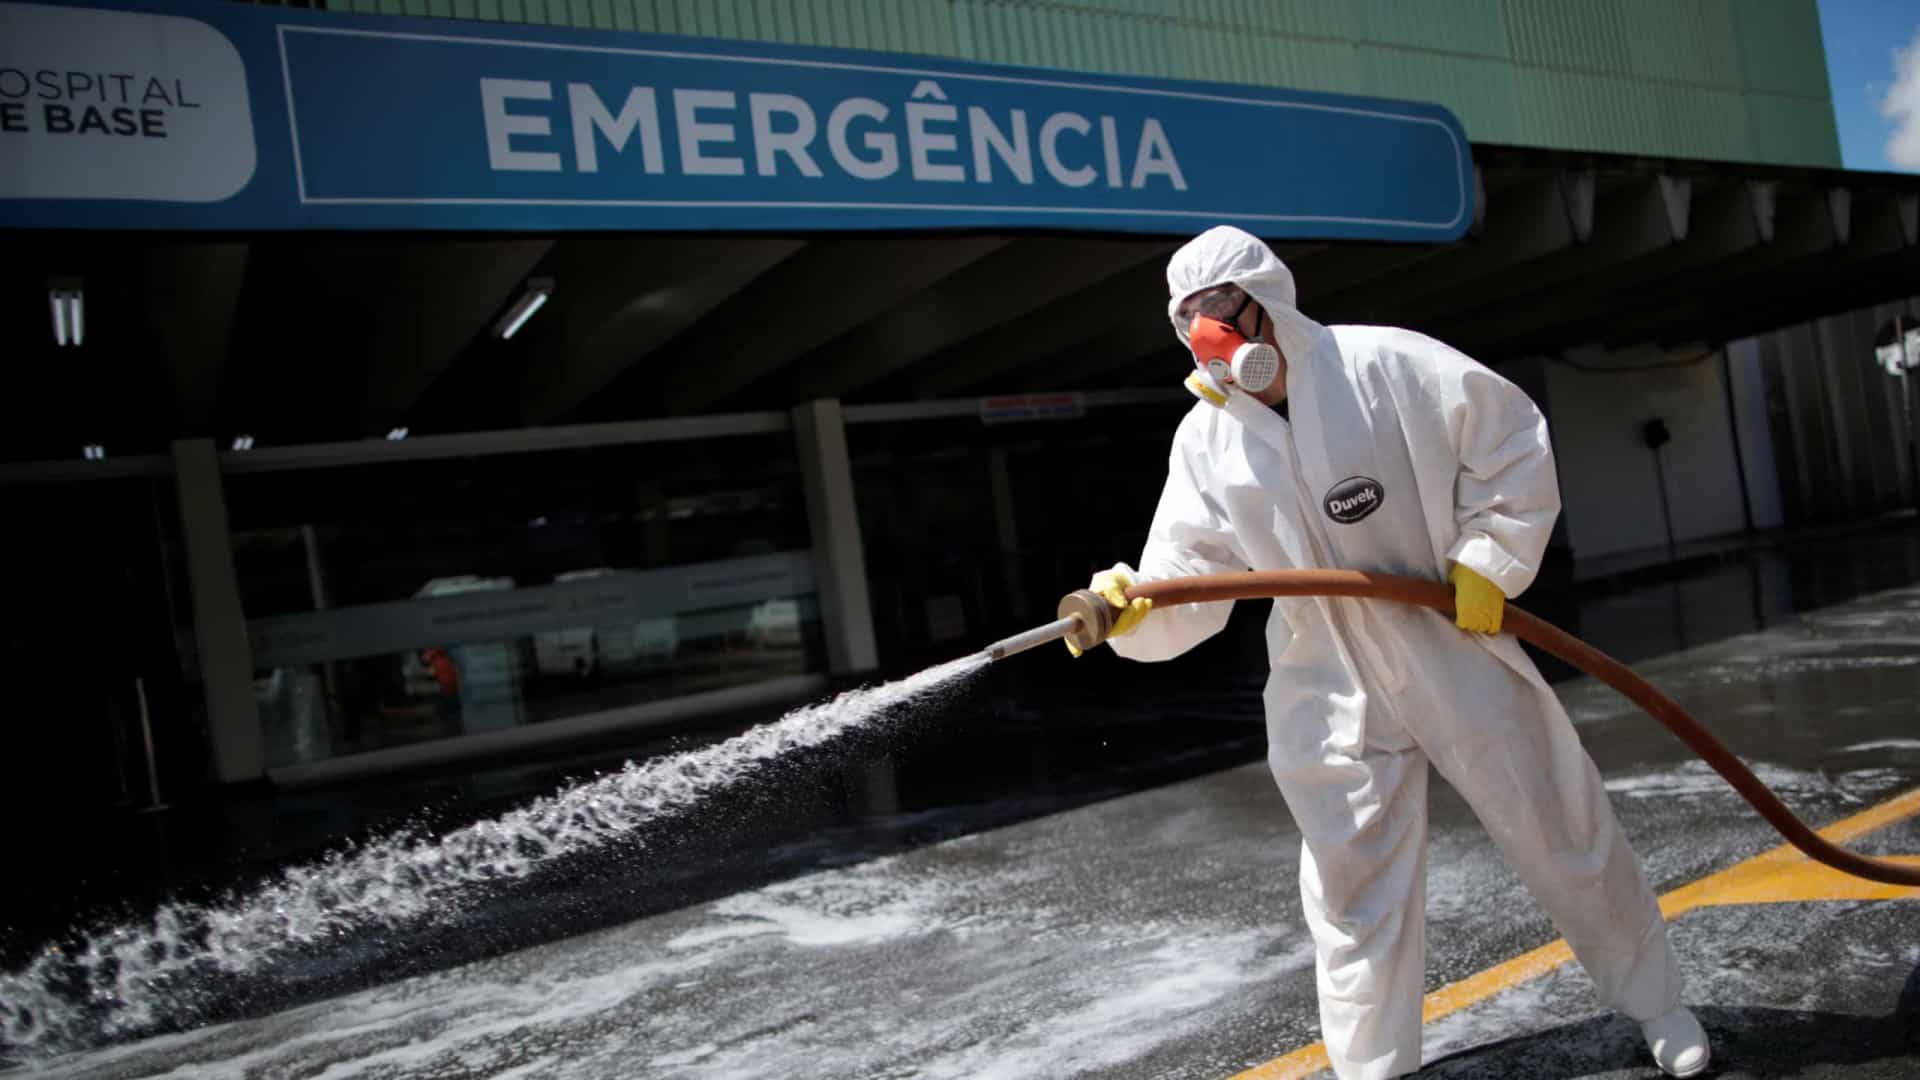 A member of the armed forces disinfects the entrance of a hospital during the coronavirus disease (COVID-19) outbreak in Brasilia, Brazil, March 31, 2020. (Photo: Ueslei Marcelino/Reuters)